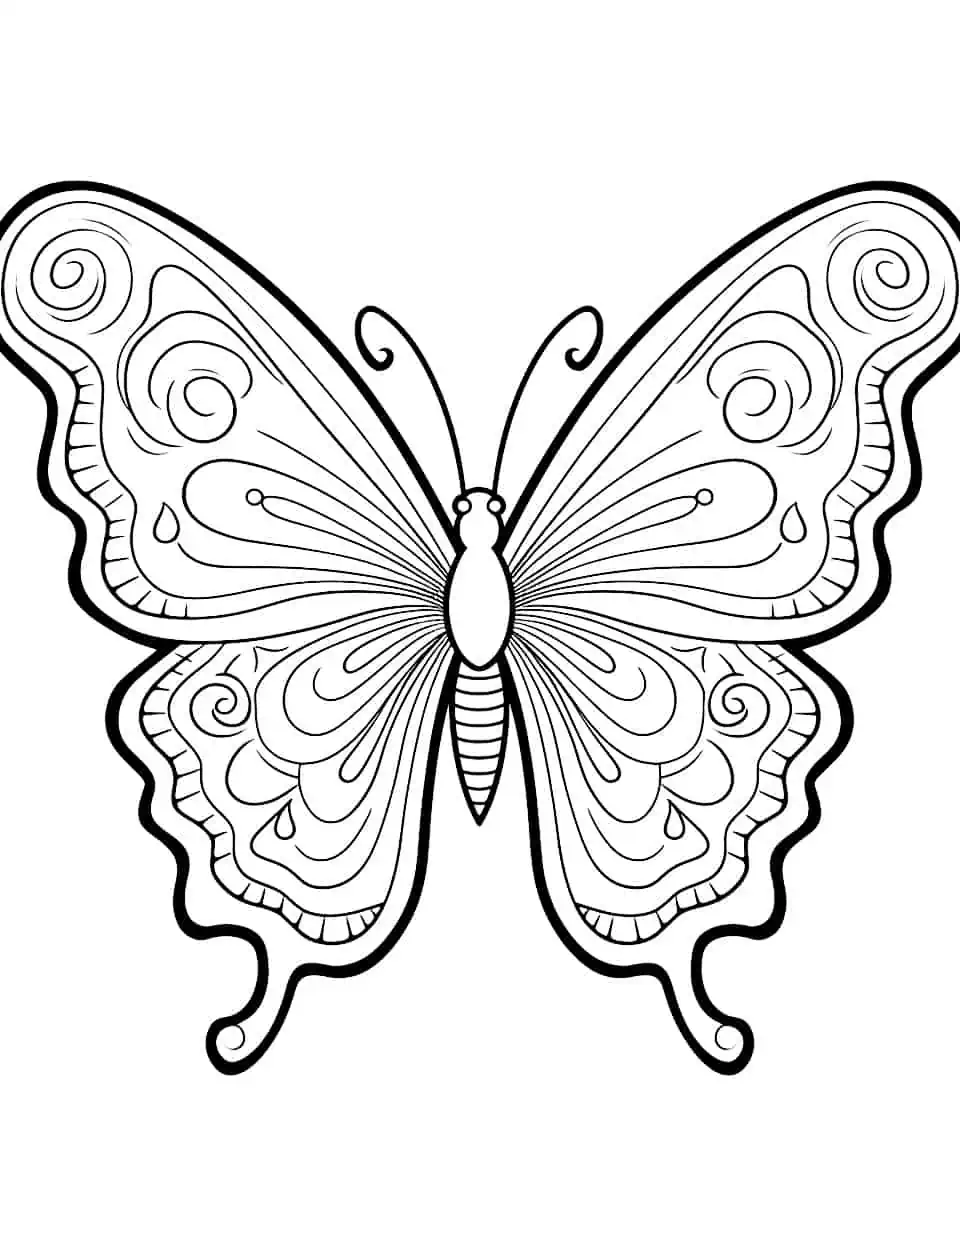 Majestic Monochrome Butterfly Coloring Page - A coloring page featuring a black and white butterfly outline, perfect for artistic exploration.